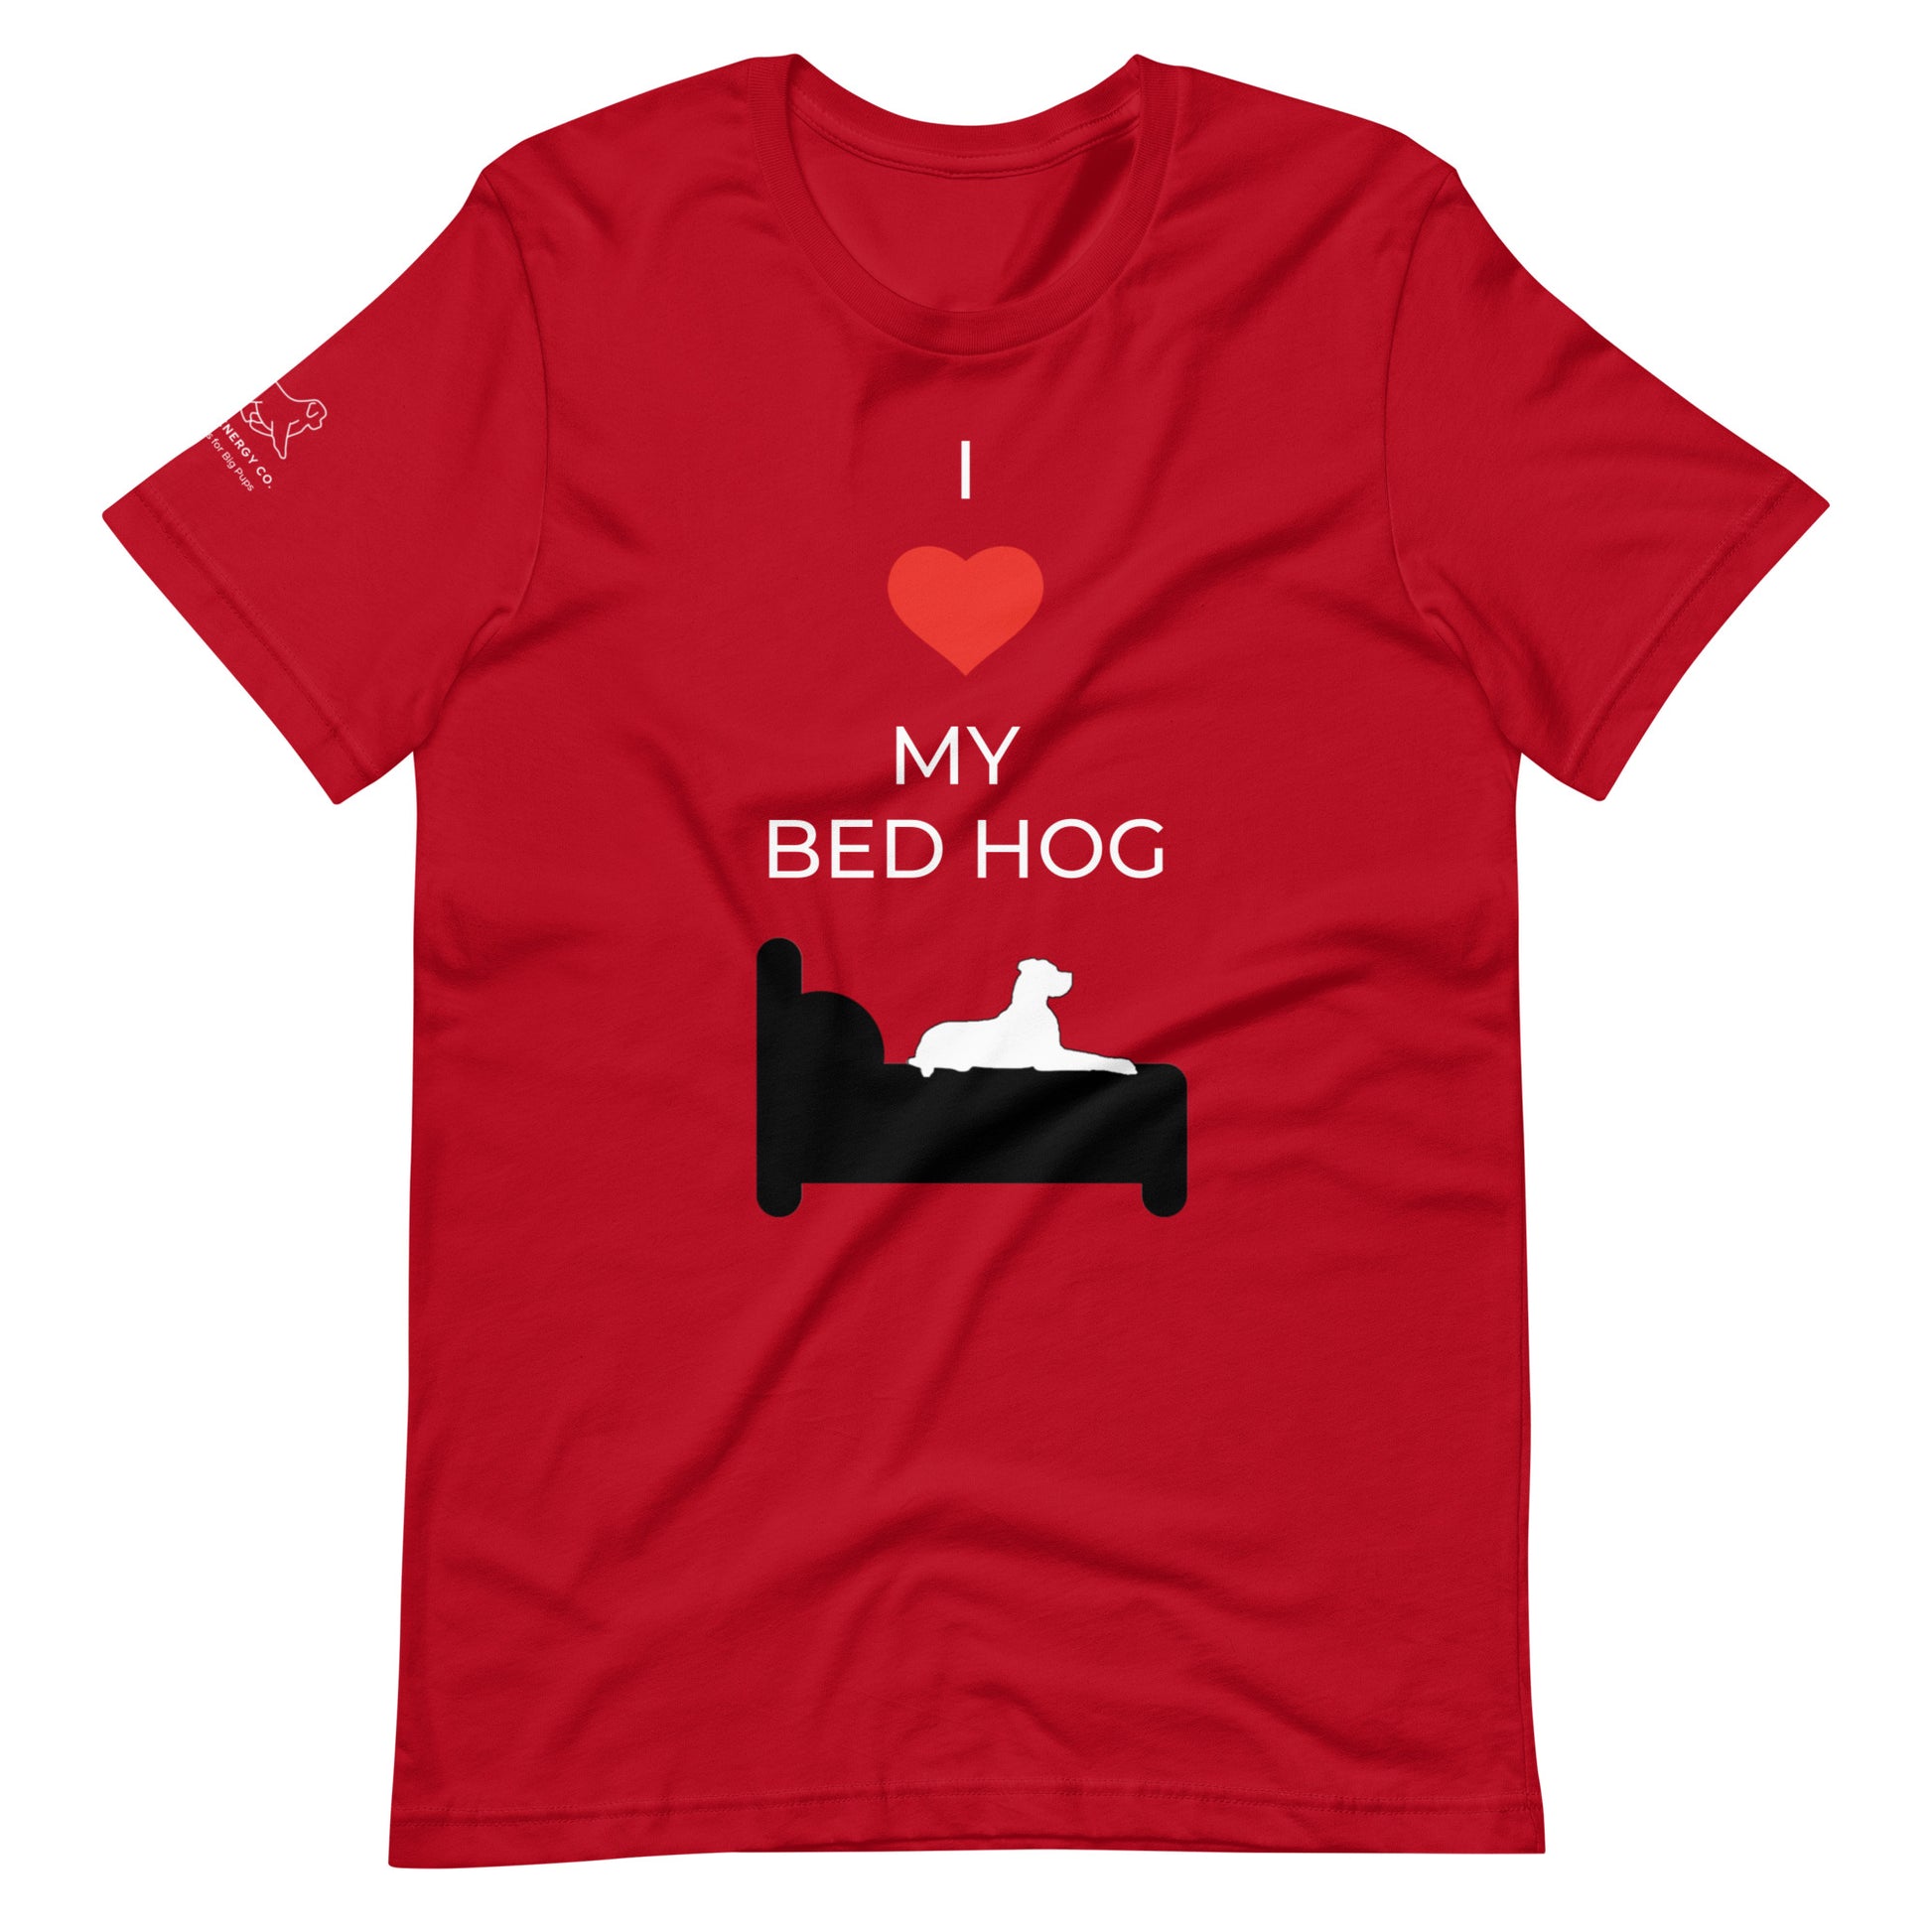 Front of a red t-shirt that reads "I love my bed hog" in white text over an illustration that is the white silhouette of a large dog laying on the black silhouette of a bed. The word "love" is replaced by a brighter red heart symbol.